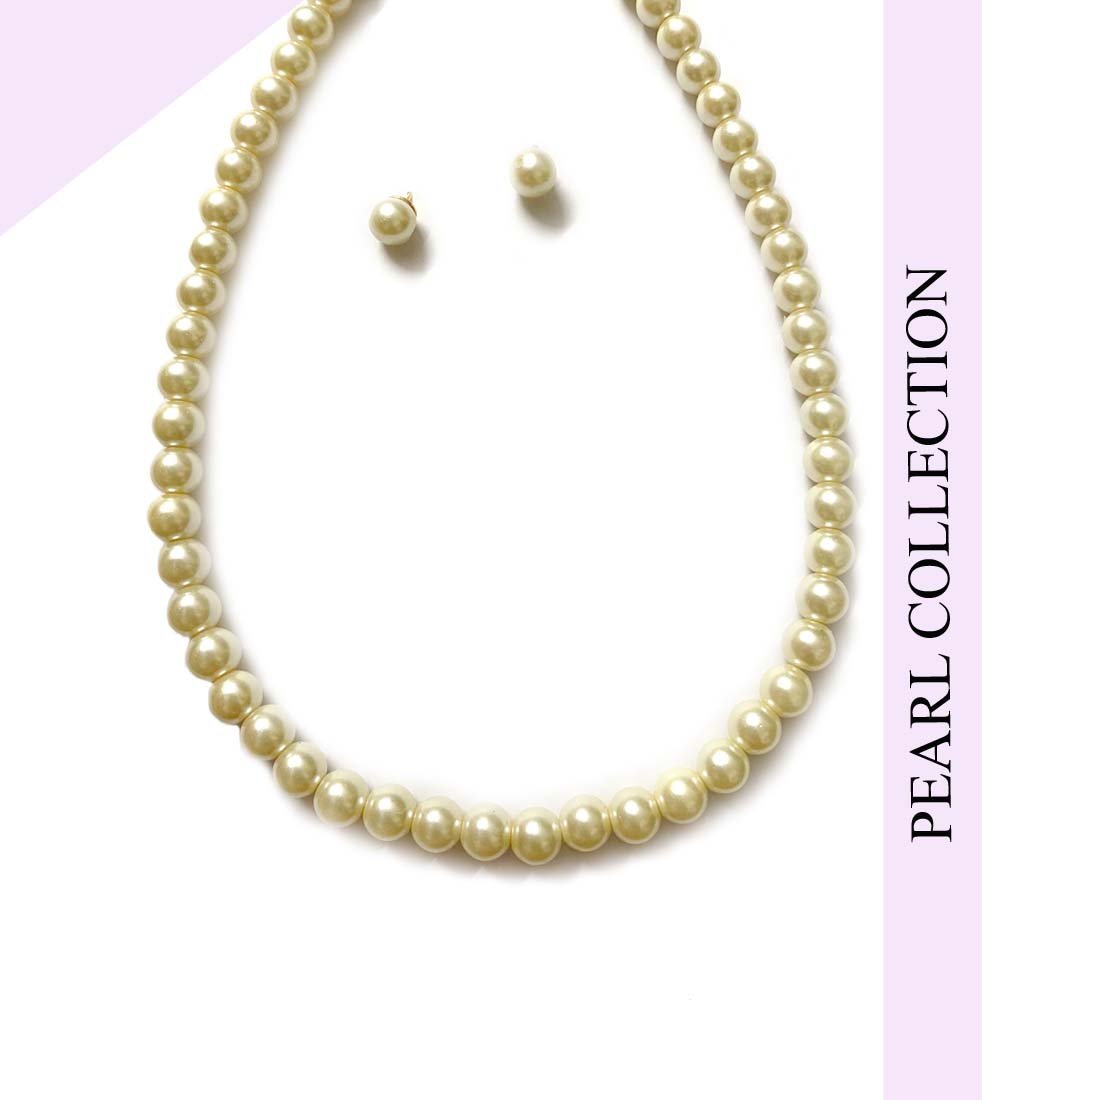 Off White Pearl Imitation Necklace Set with Earrings